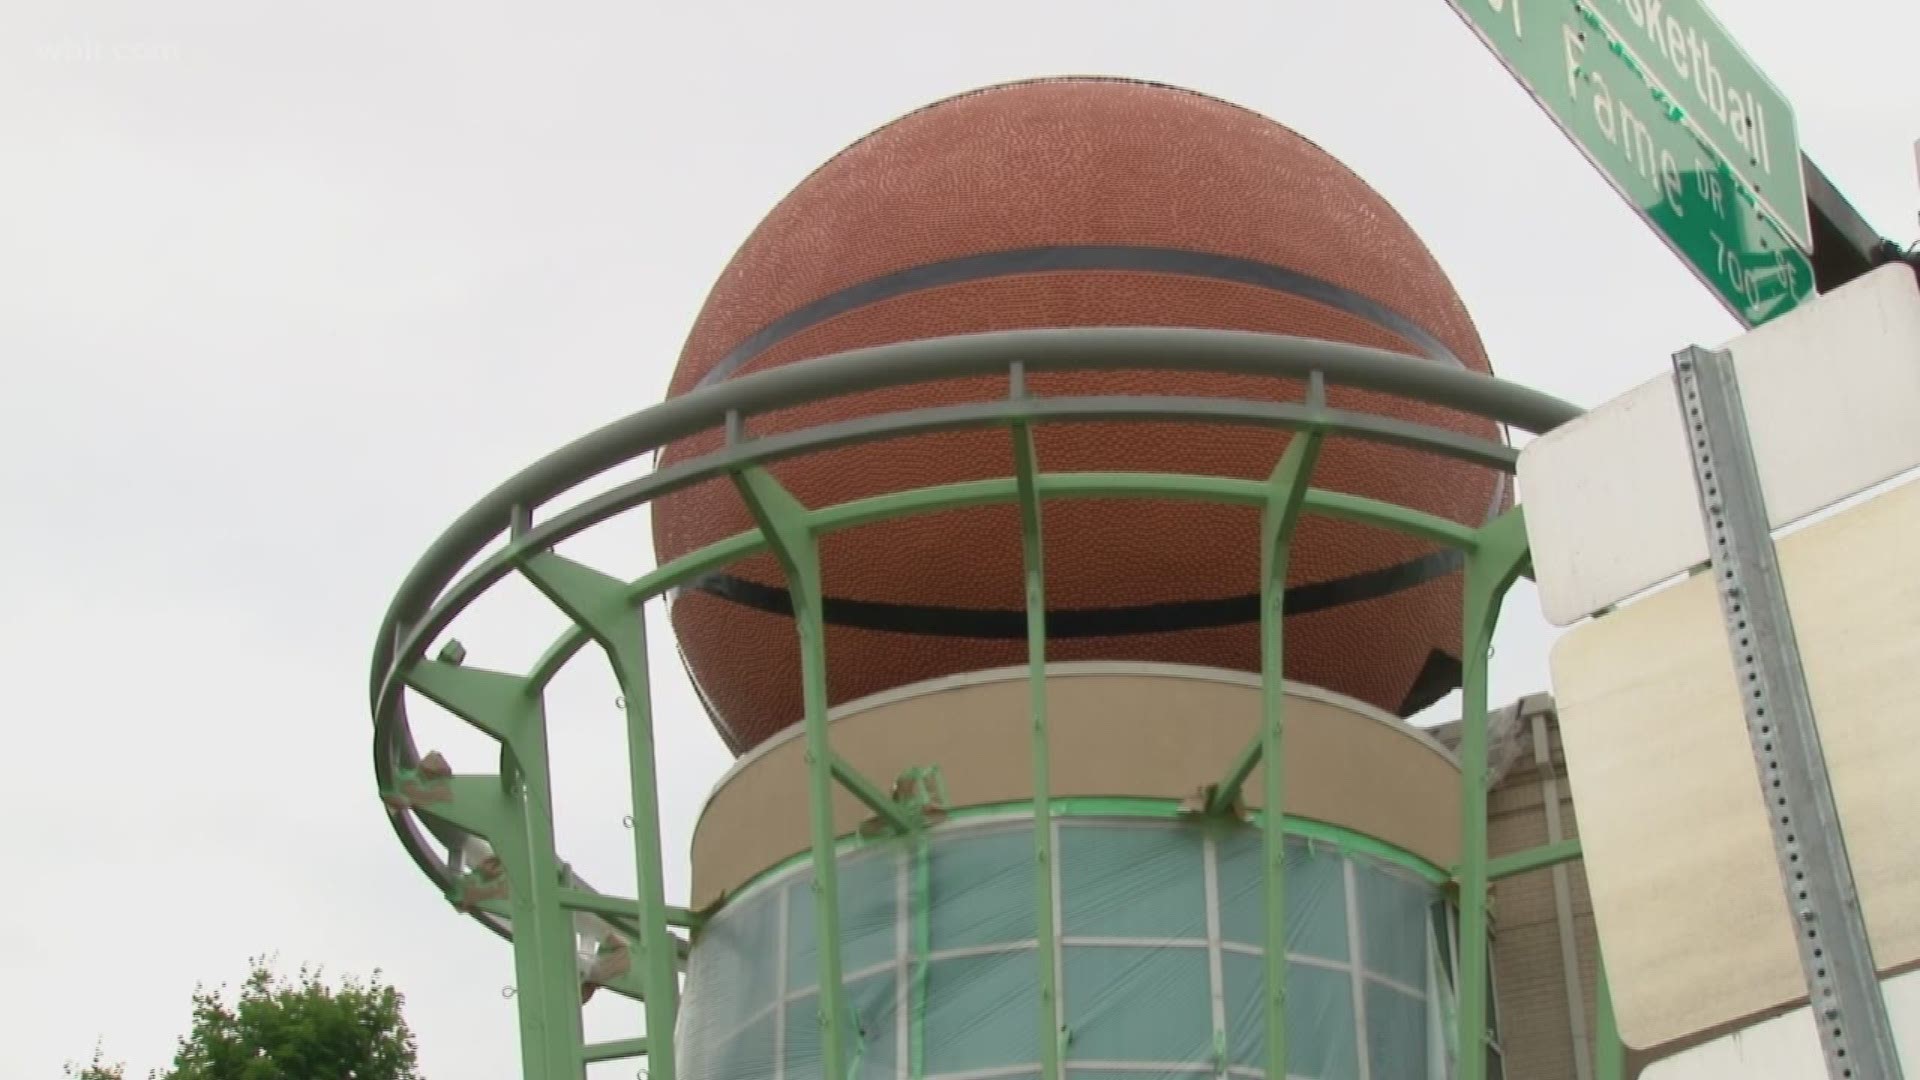 The giant basketball that's part of Knoxville's skyline is getting a fresh coat of paint